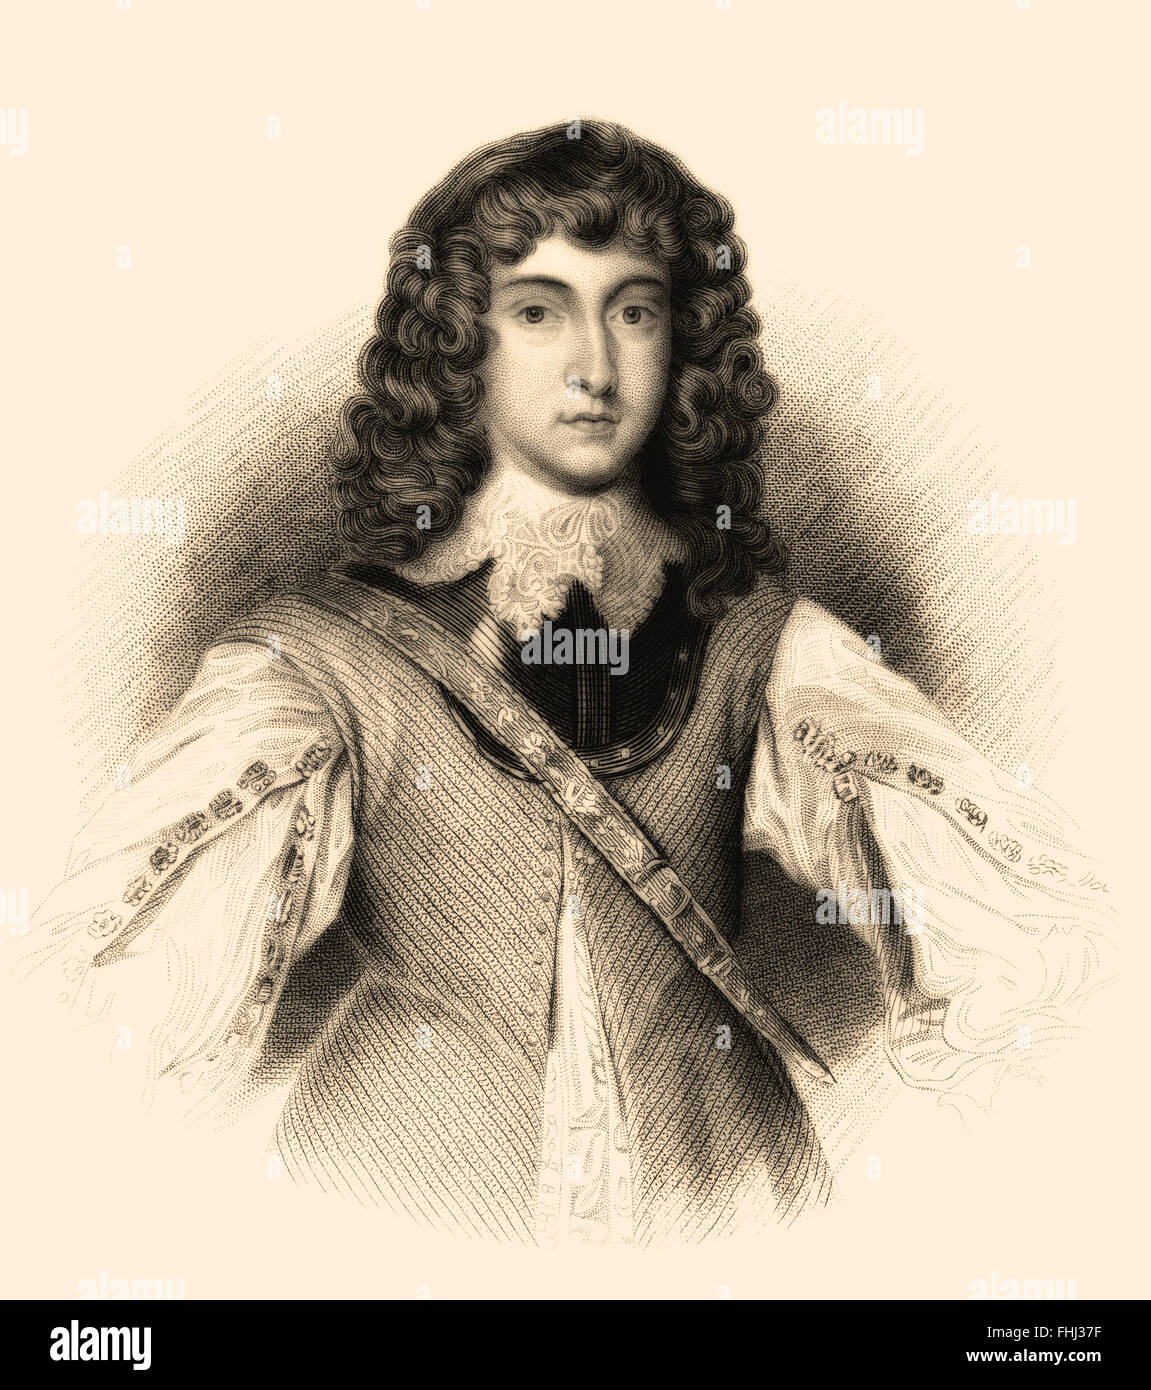 Prince Rupert of the Rhine, 1619-1682, a German soldier, admiral, scientist, sportsman, colonial governor Stock Photo